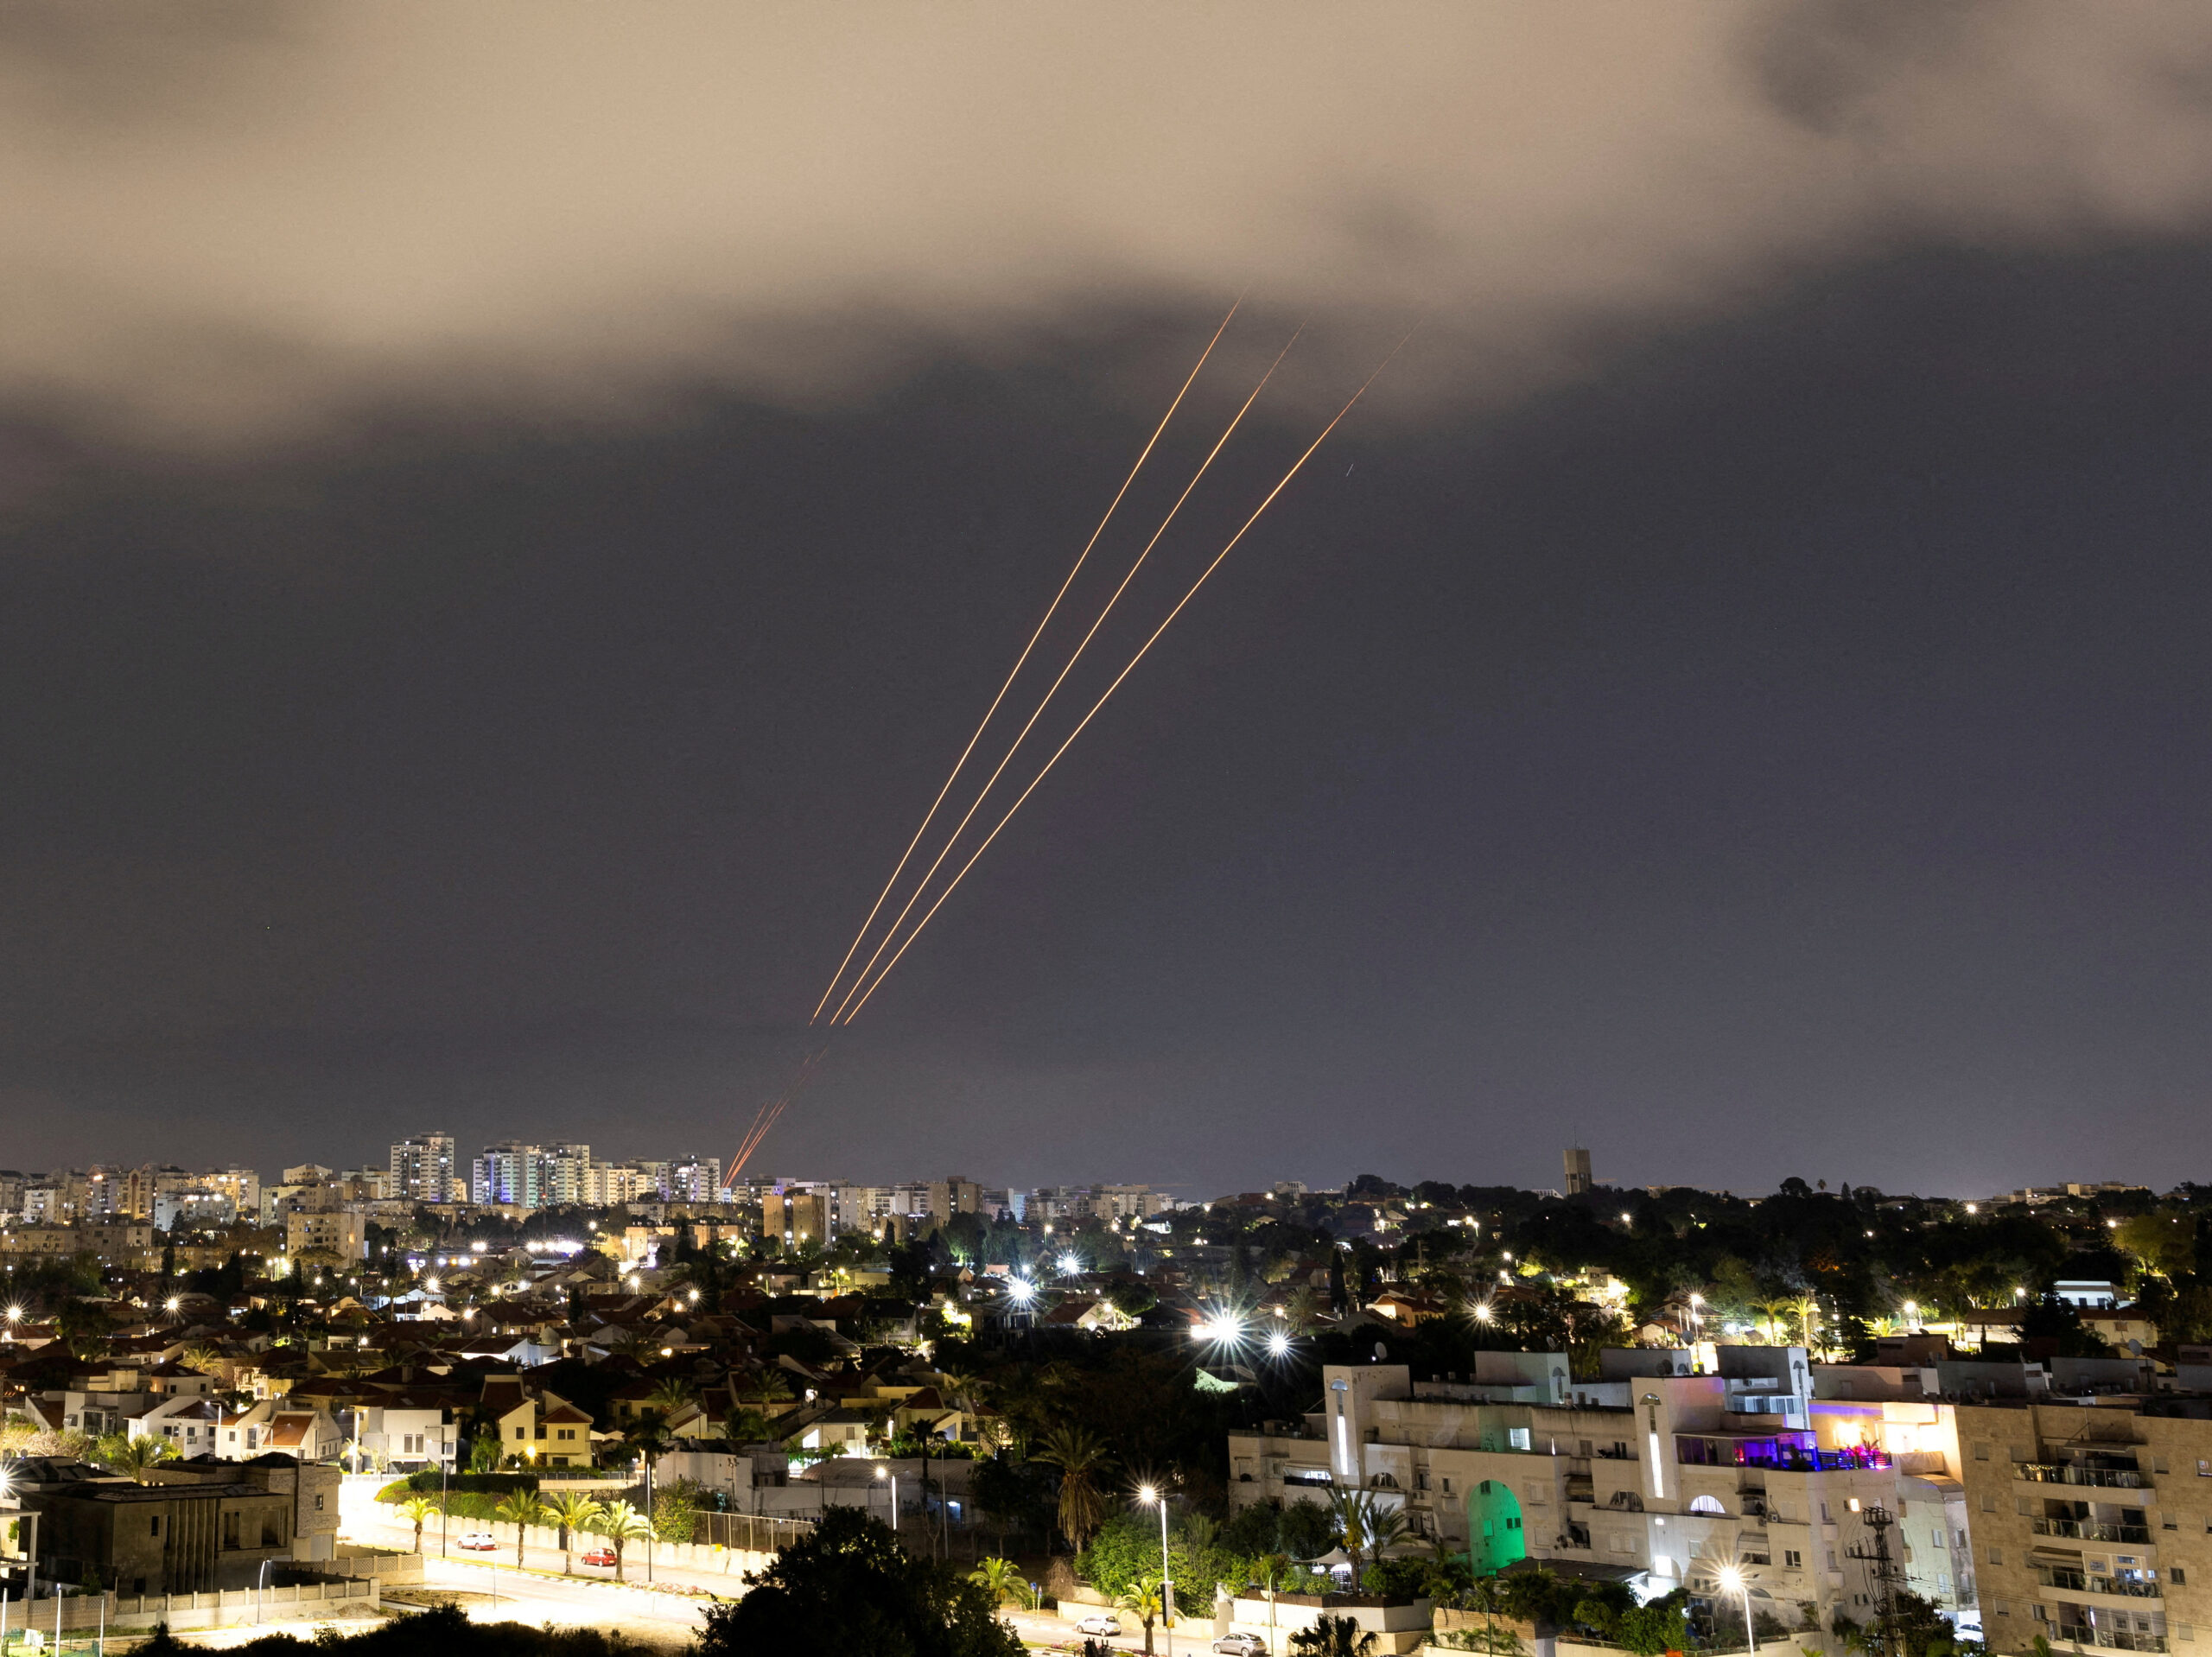 An anti-missile system operates after Iran launched drones and missiles toward Israel, as seen from Ashkelon, Israel, April 14.